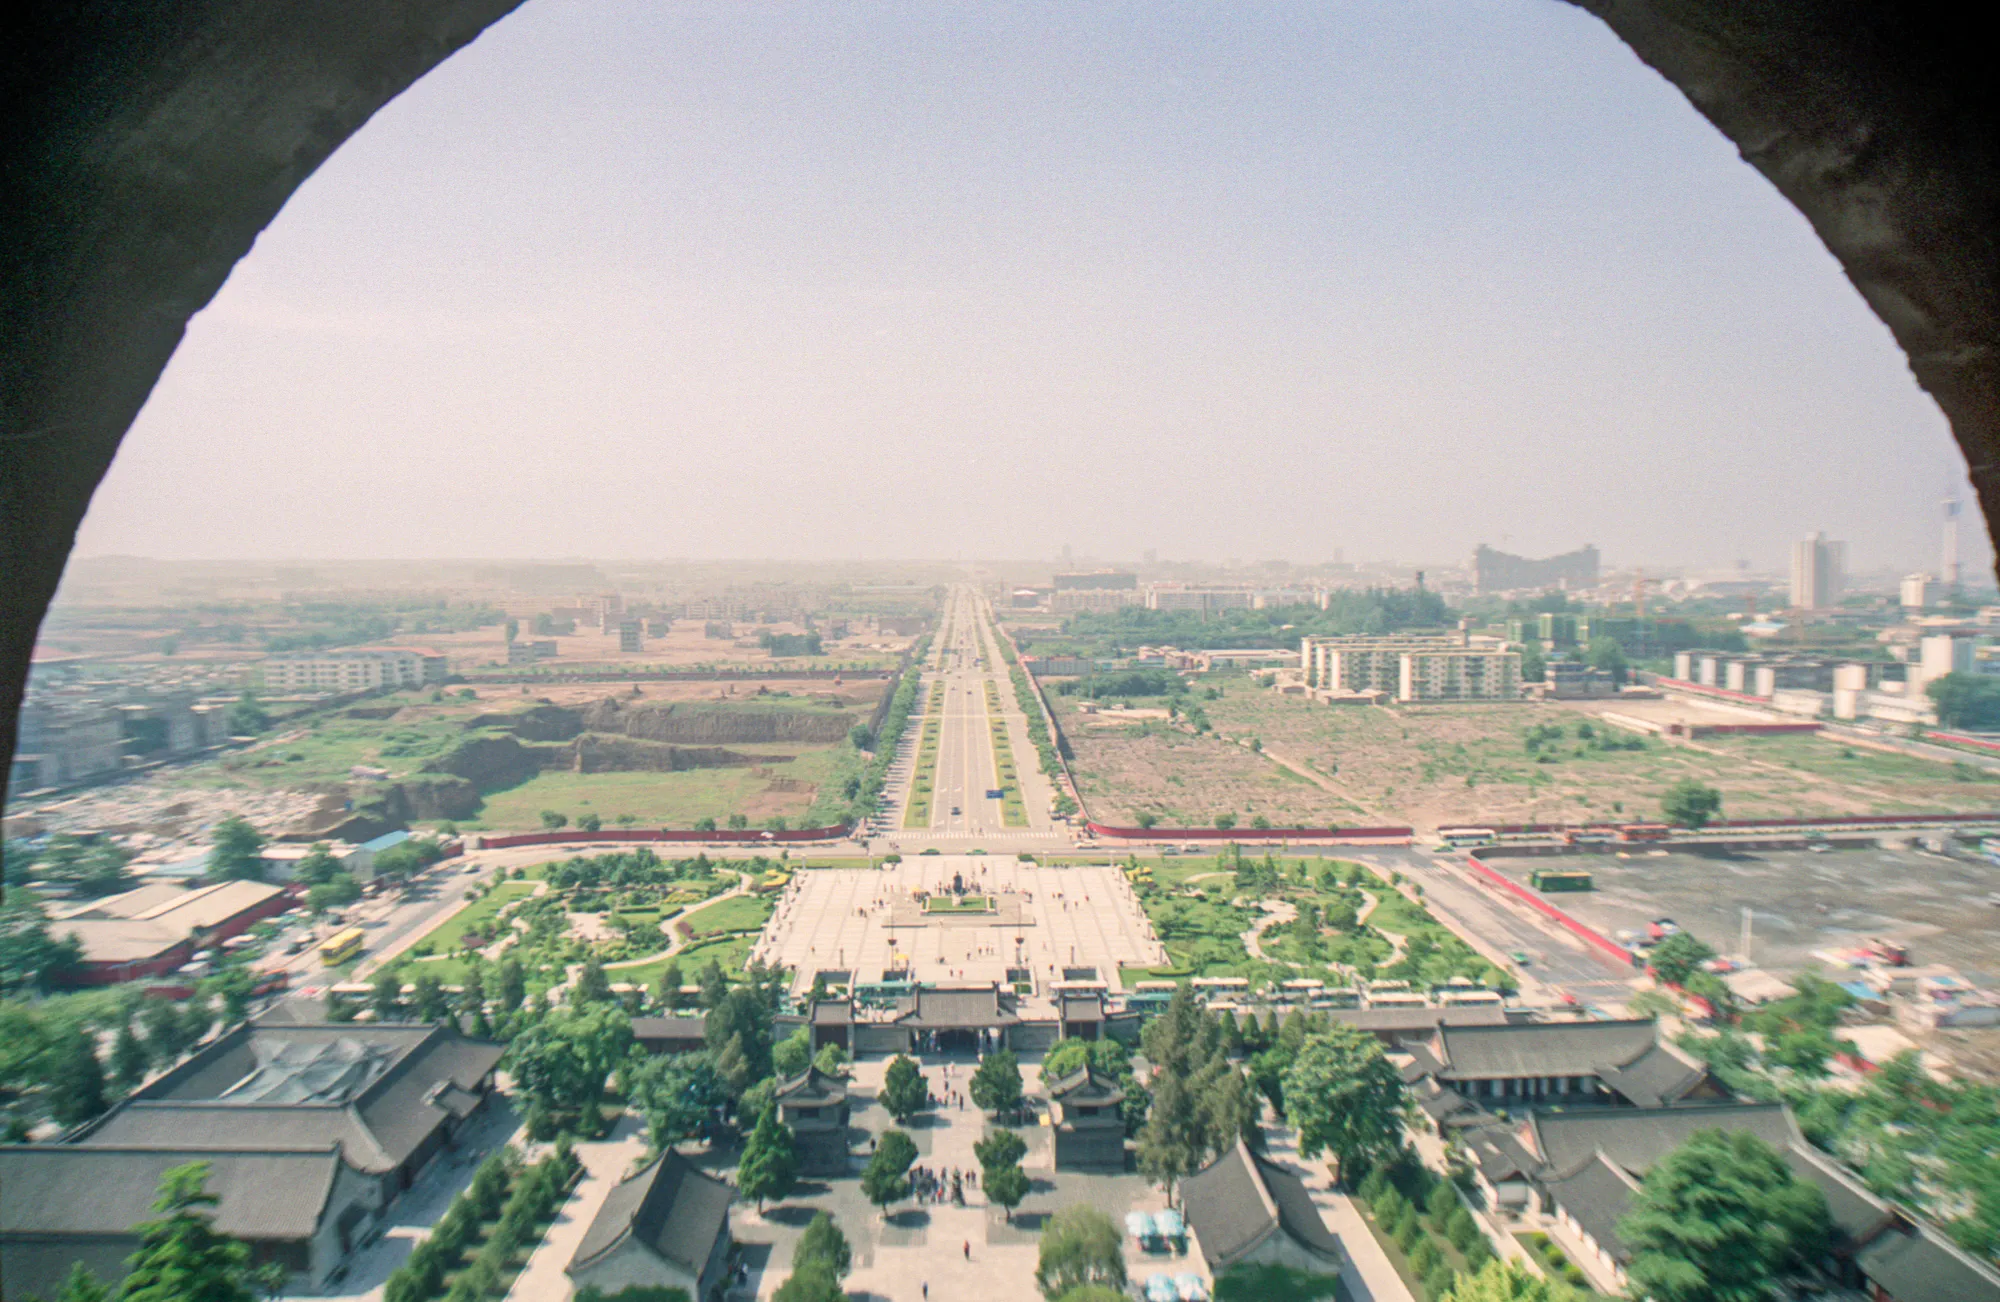 Looking south from the Giant Wild Goose Pagoda